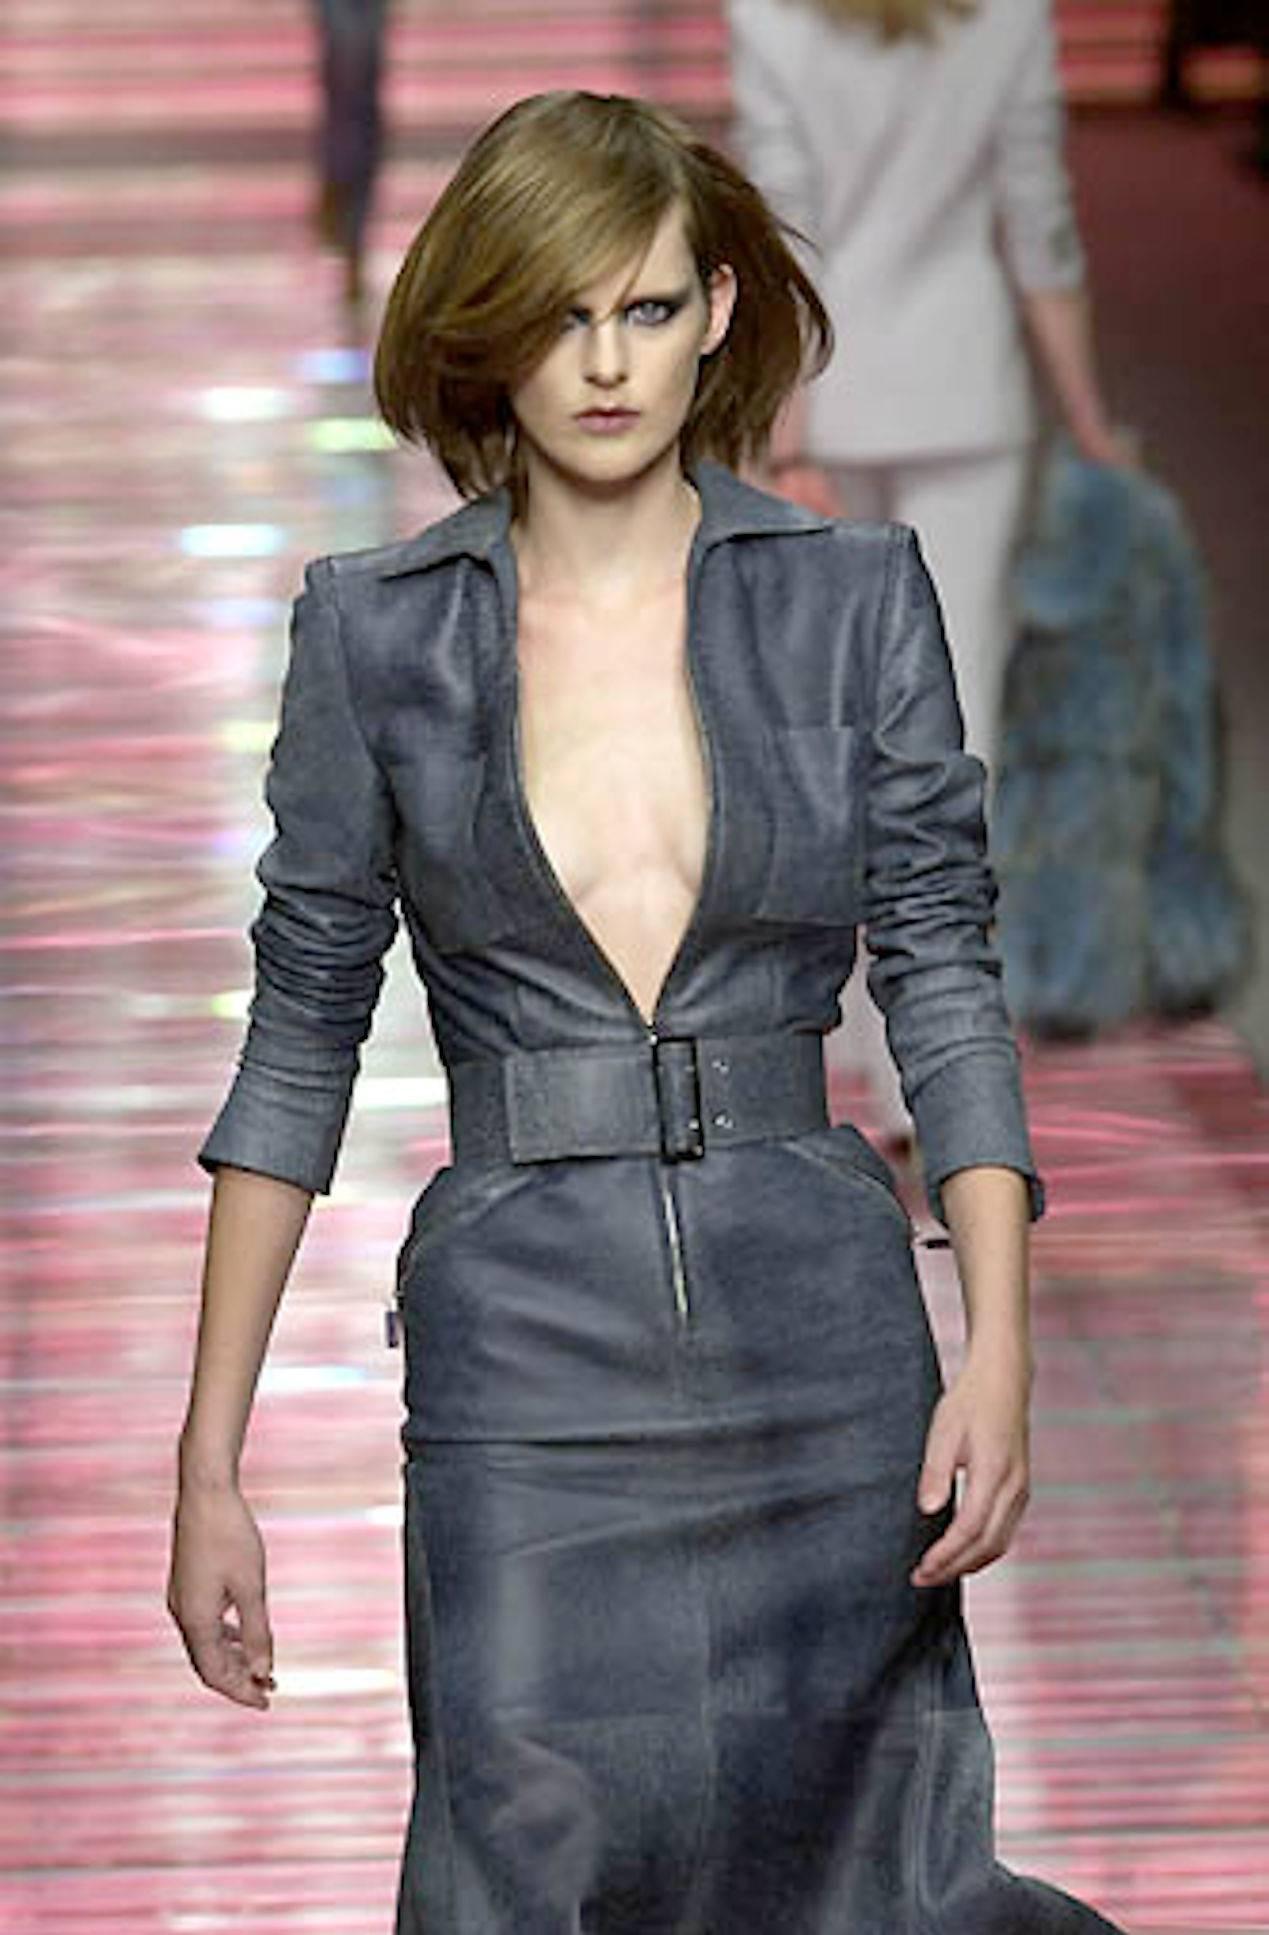 GIANNI VERSACE Demin/Jeans-Style Distressed Leather Dress Gown 2001 For Sale 1